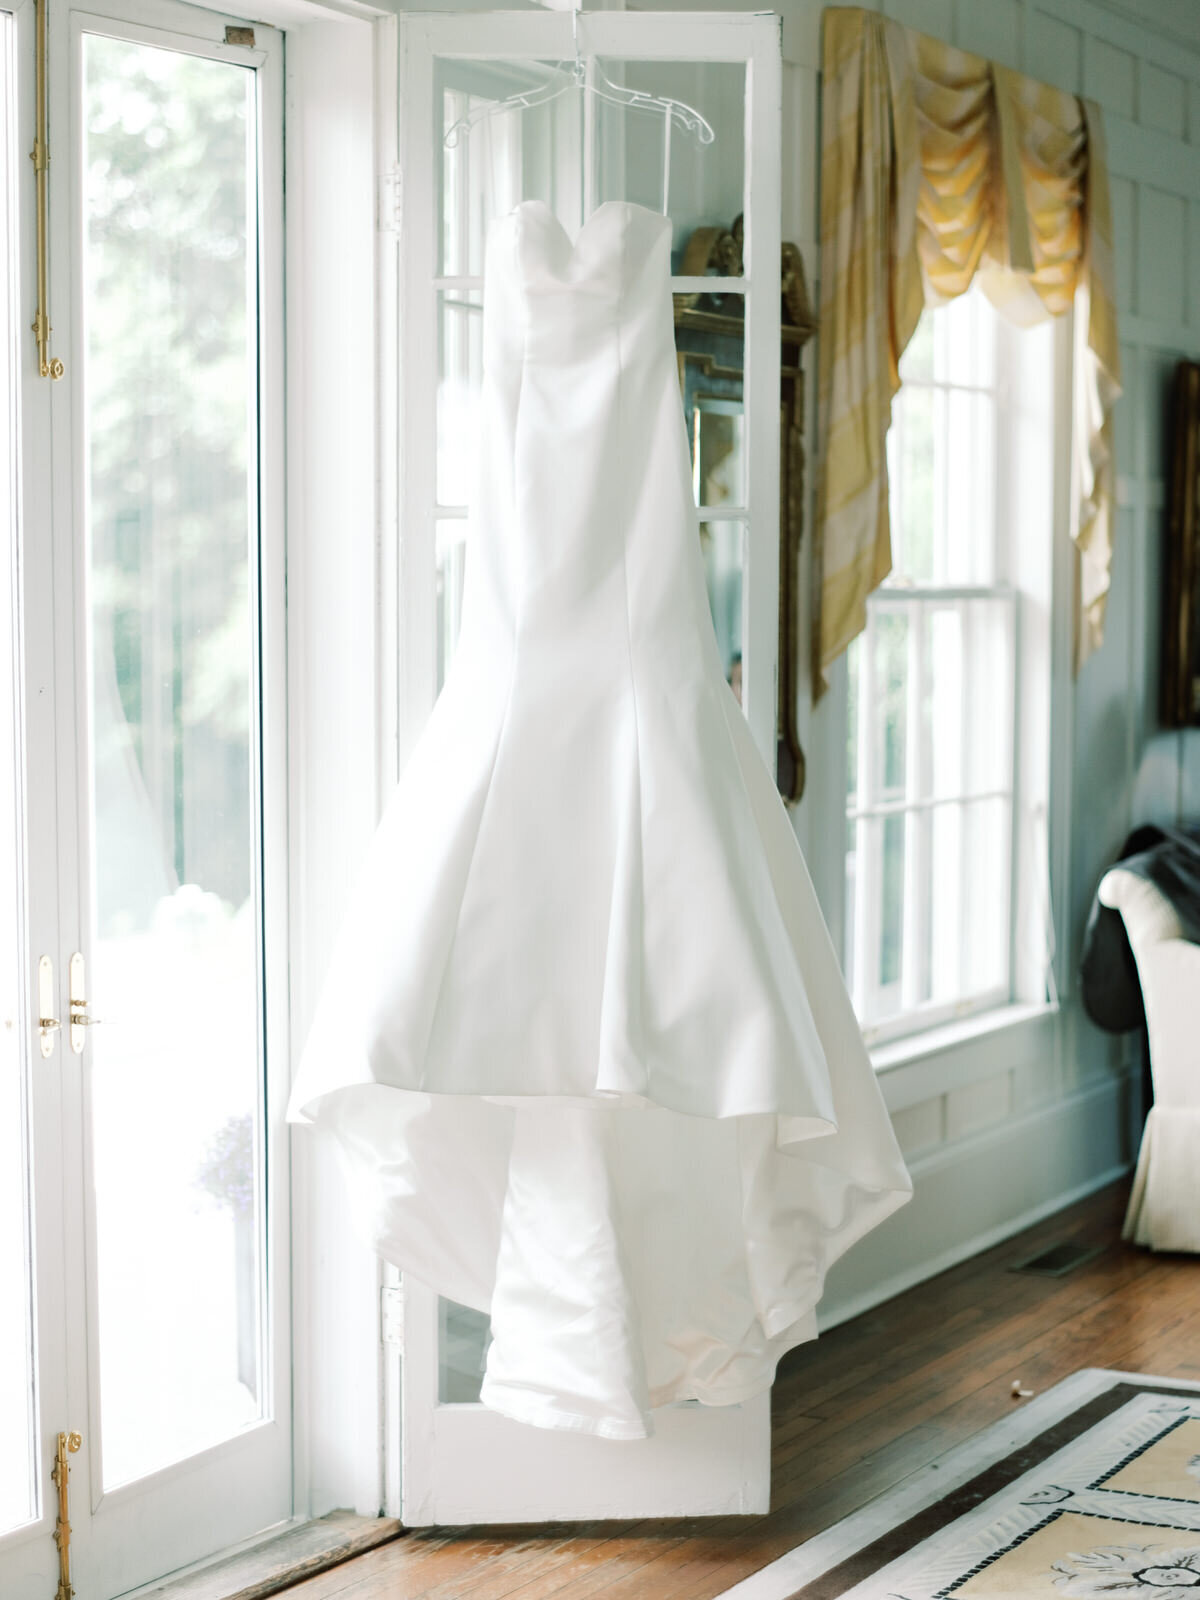 Bright and stylish wedding photography at the classic Westglow Spa in the Blue Ridge Mountains.